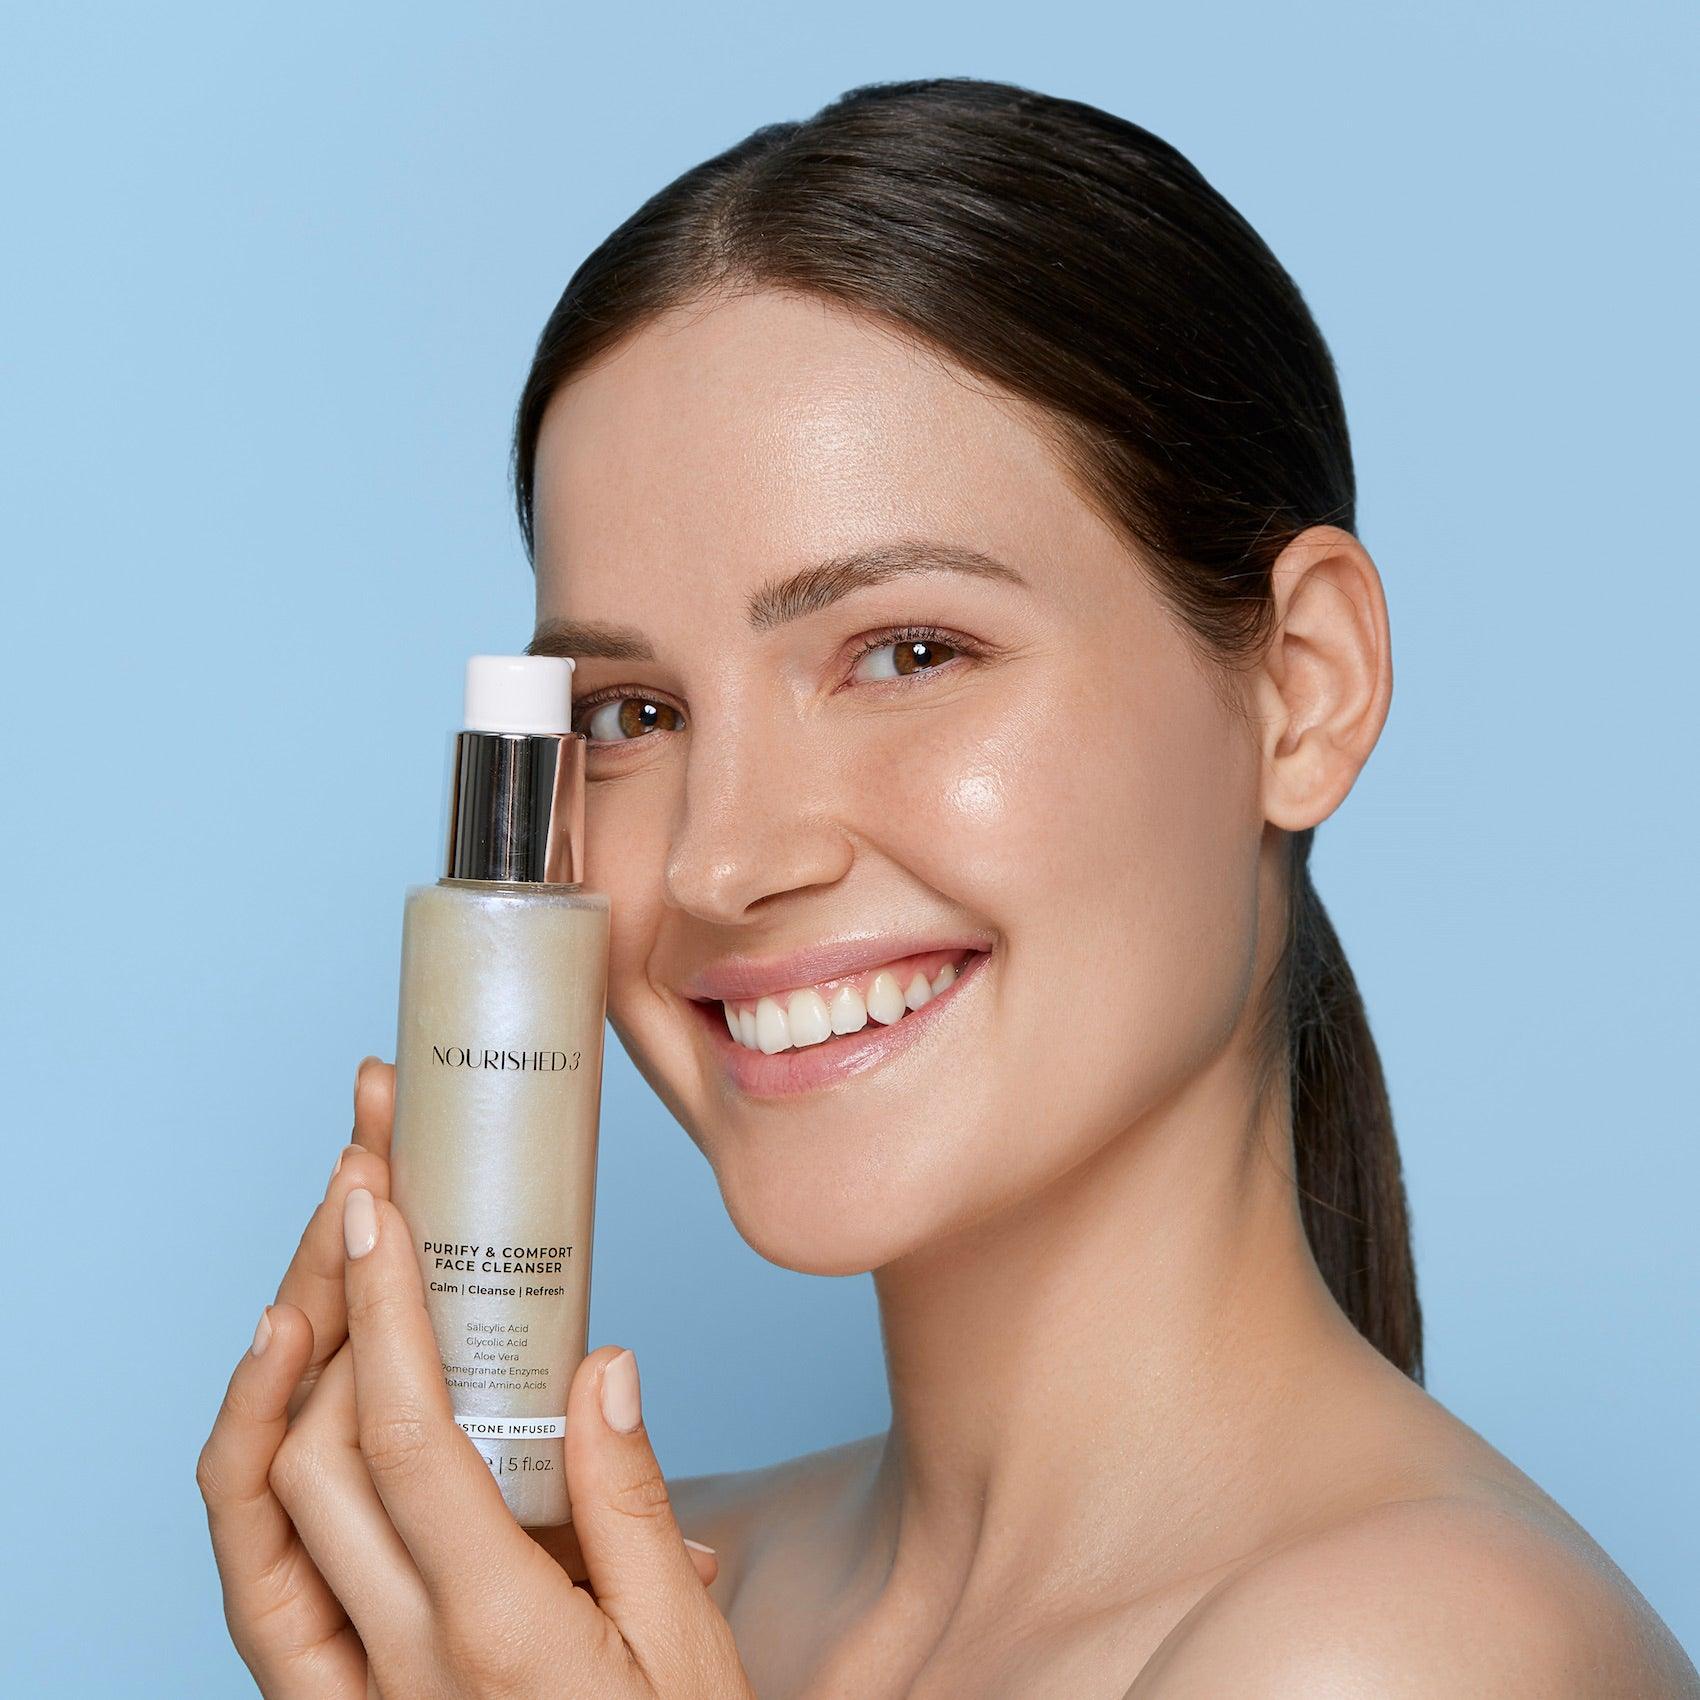 Purify & Comfort Face Cleanser